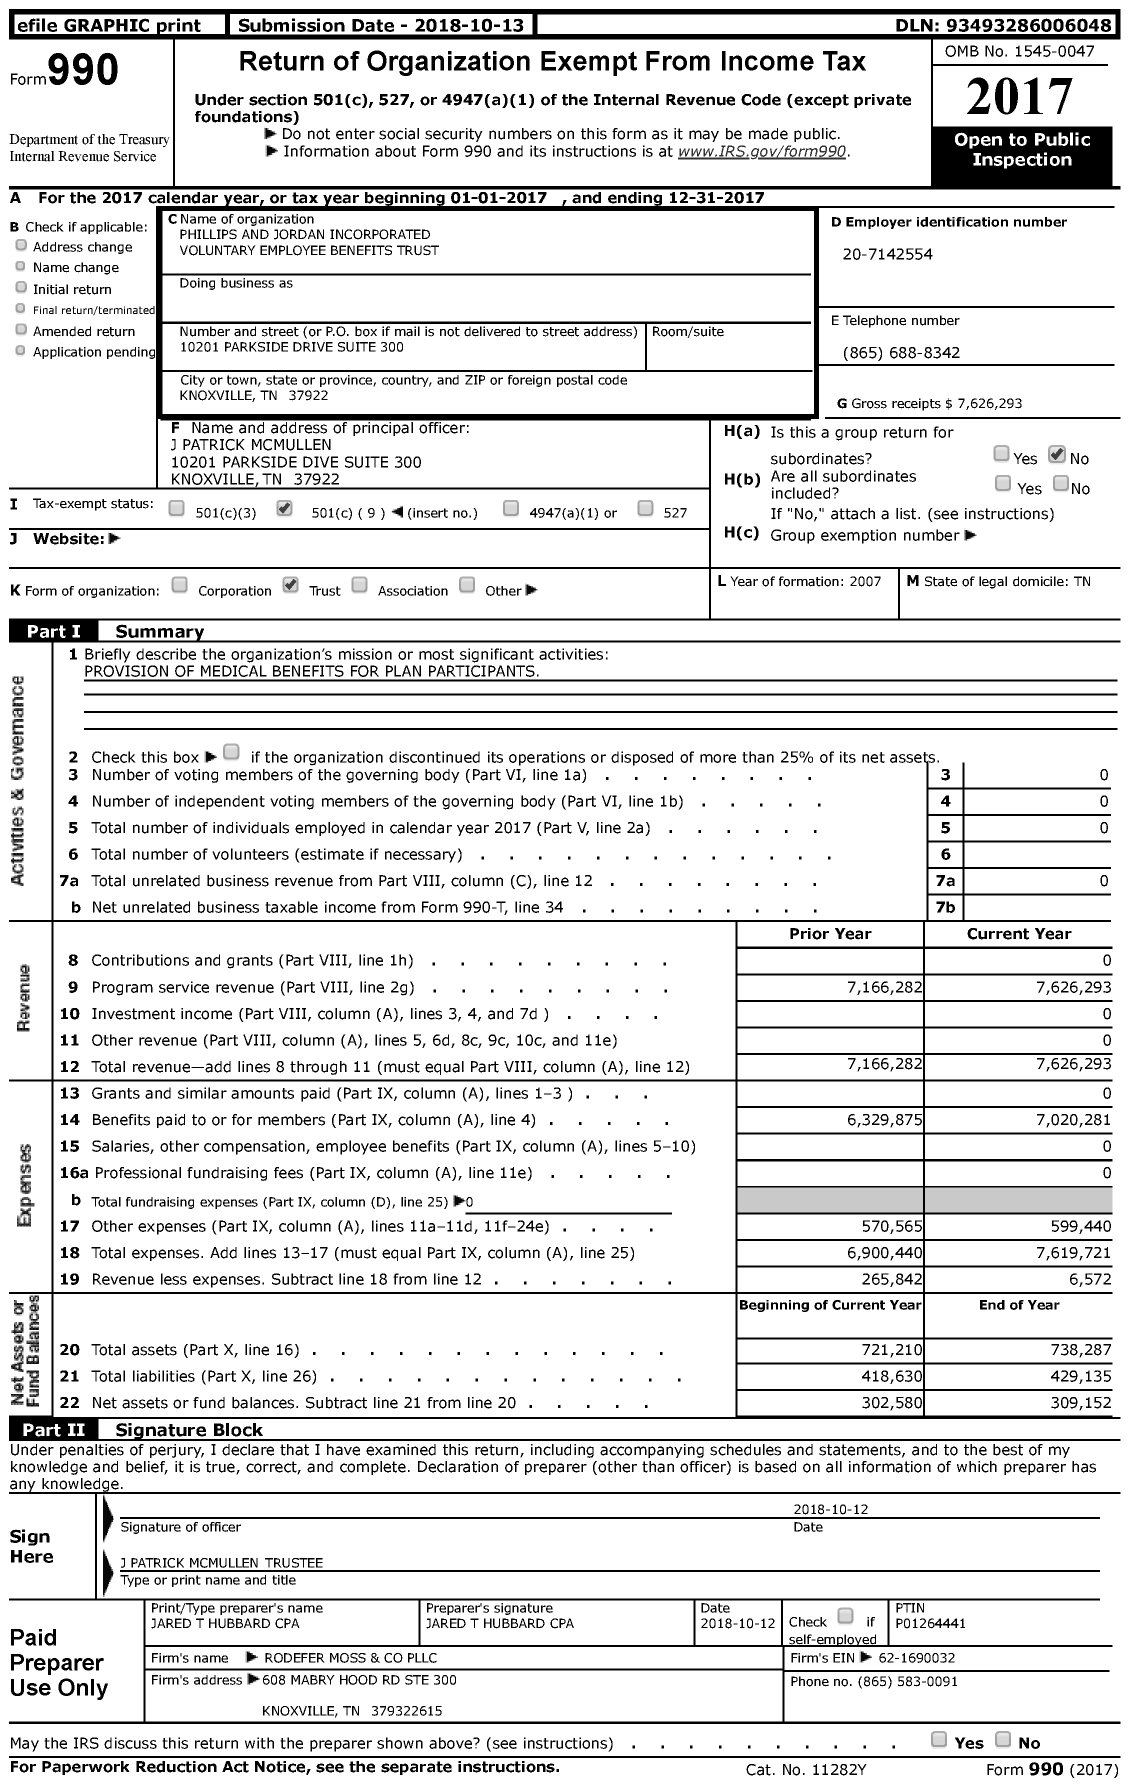 Image of first page of 2017 Form 990 for Phillips and Jordan Incorporated Voluntary Employee Benefits Trust